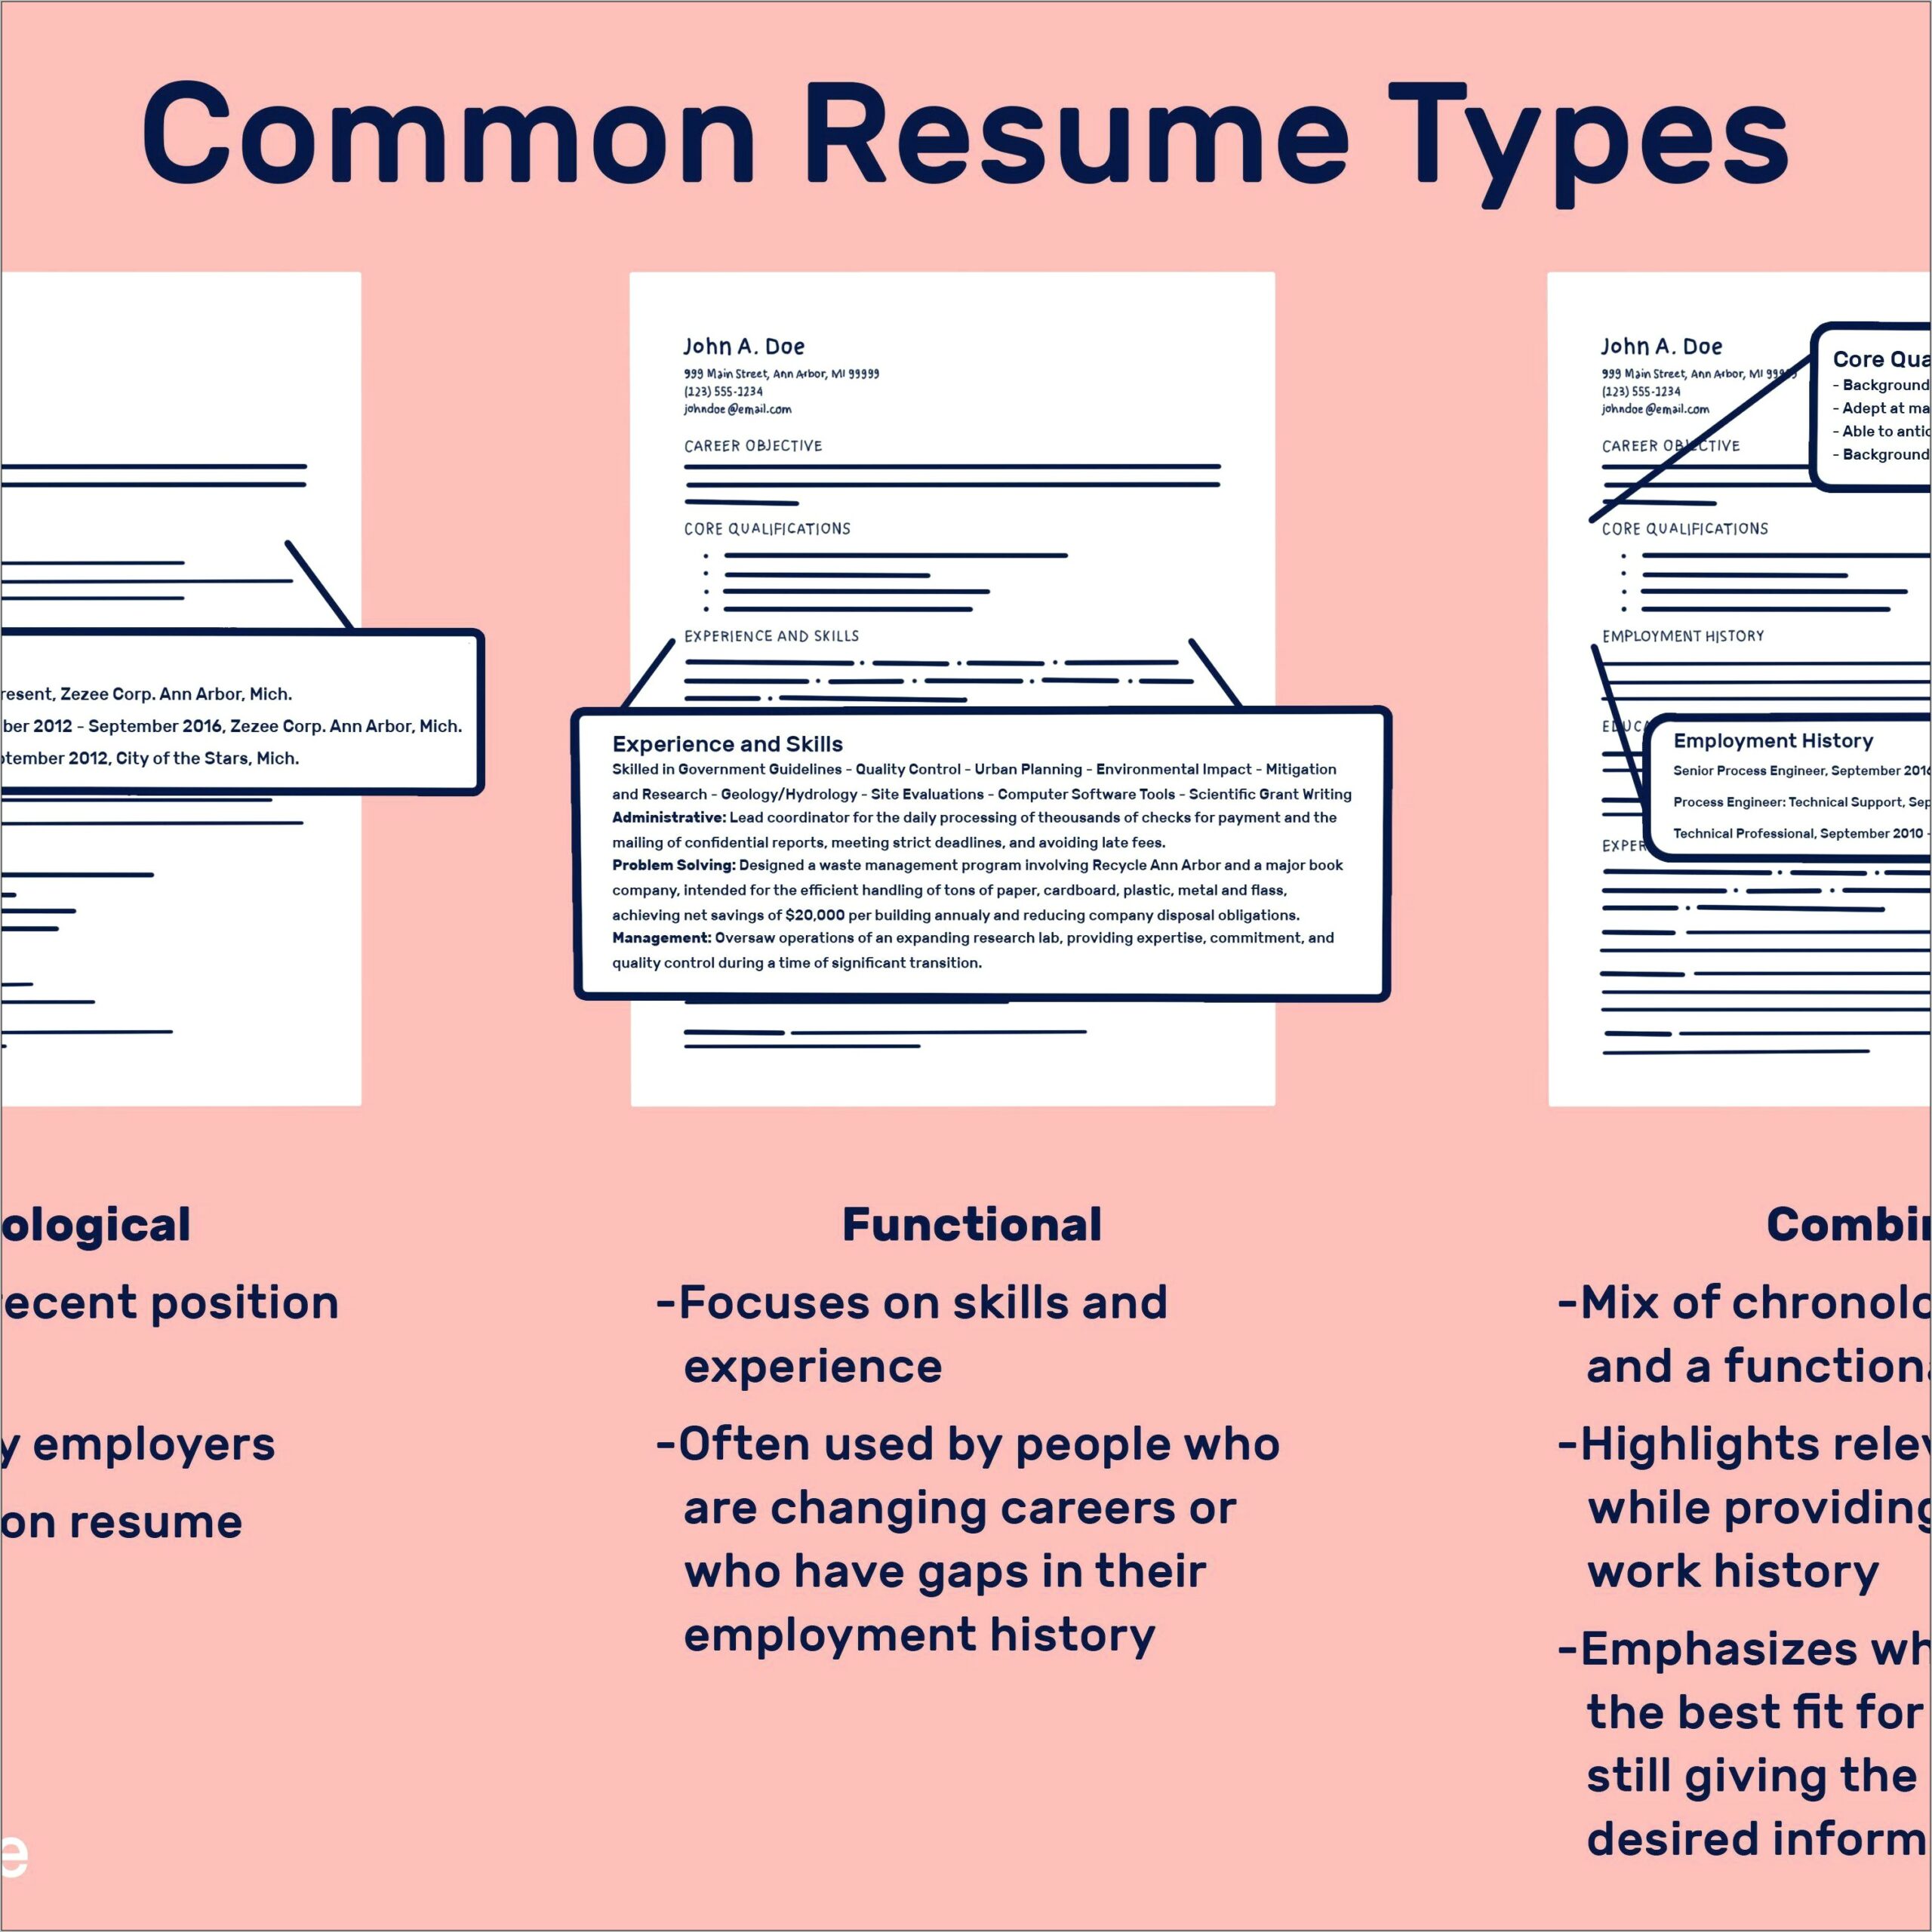 Brief Background Summary For Resume Should Include